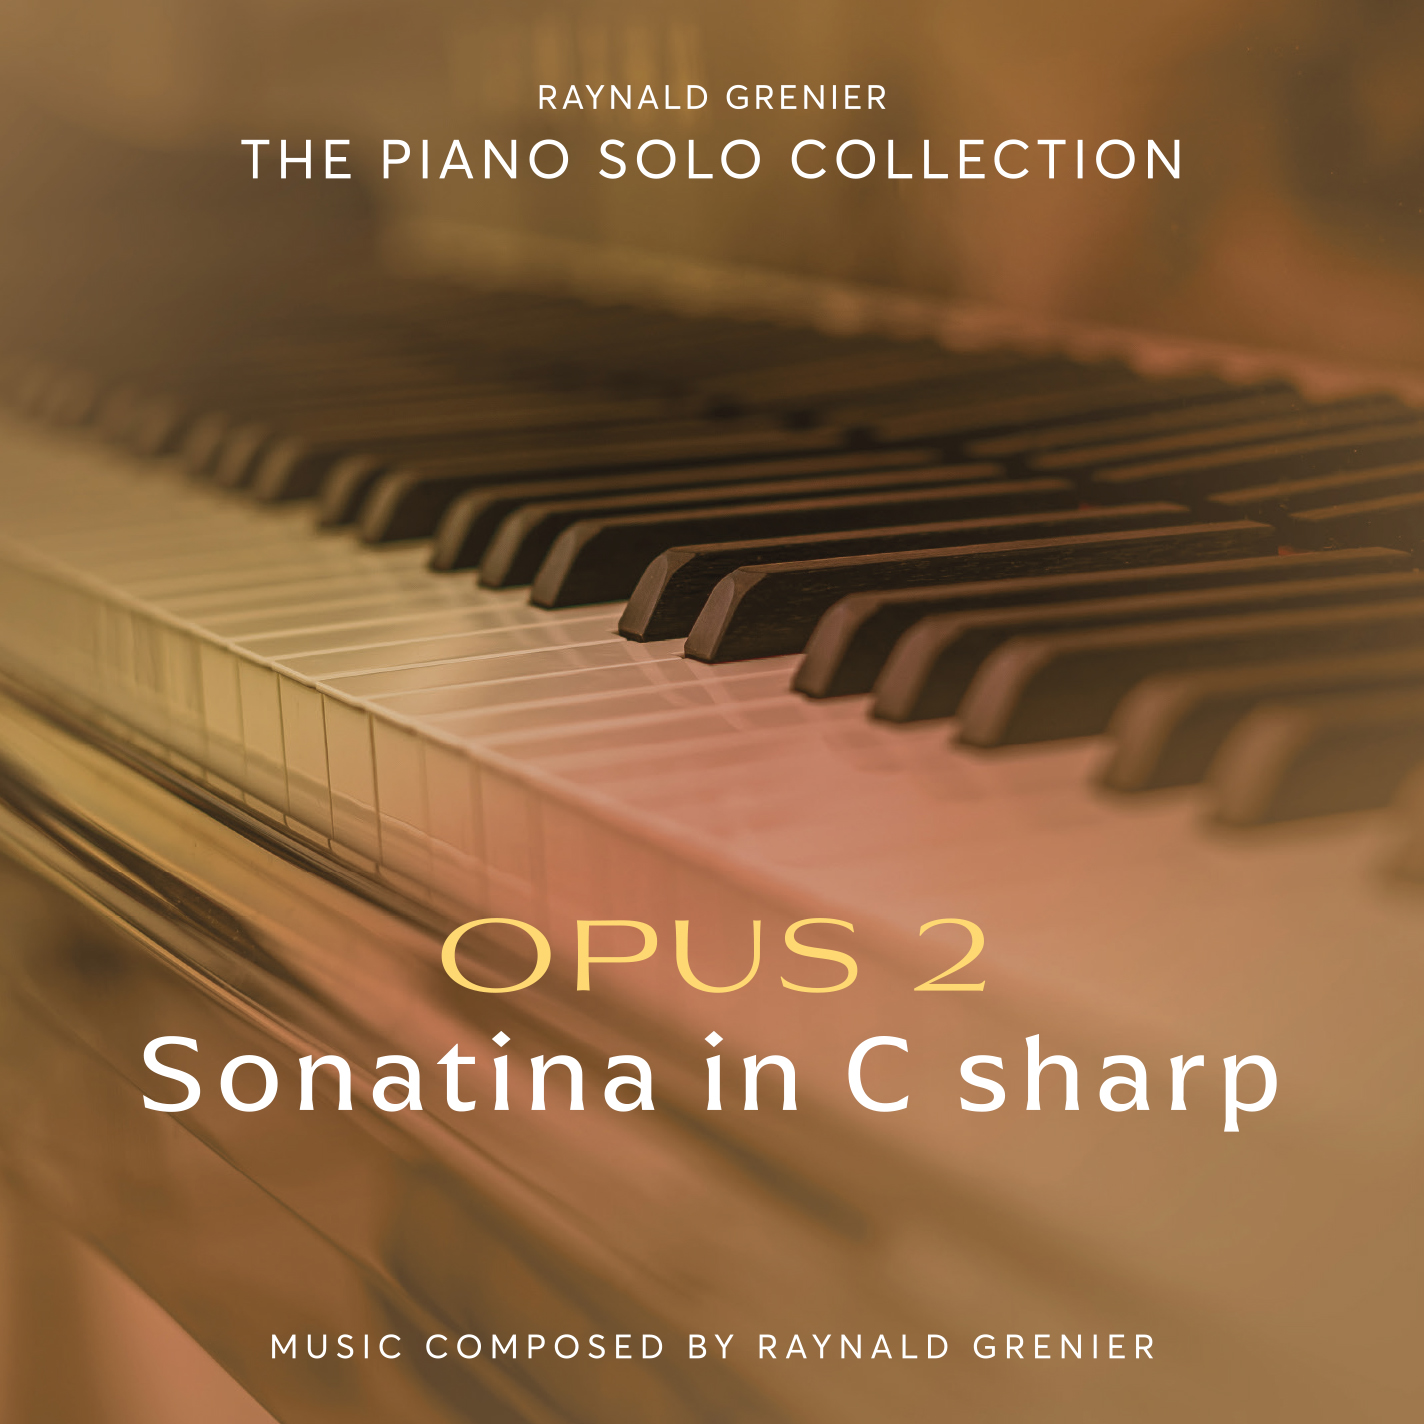 Raynald Grenier introduces “Sonatina in C Sharp”, a short glimpse of serenity.